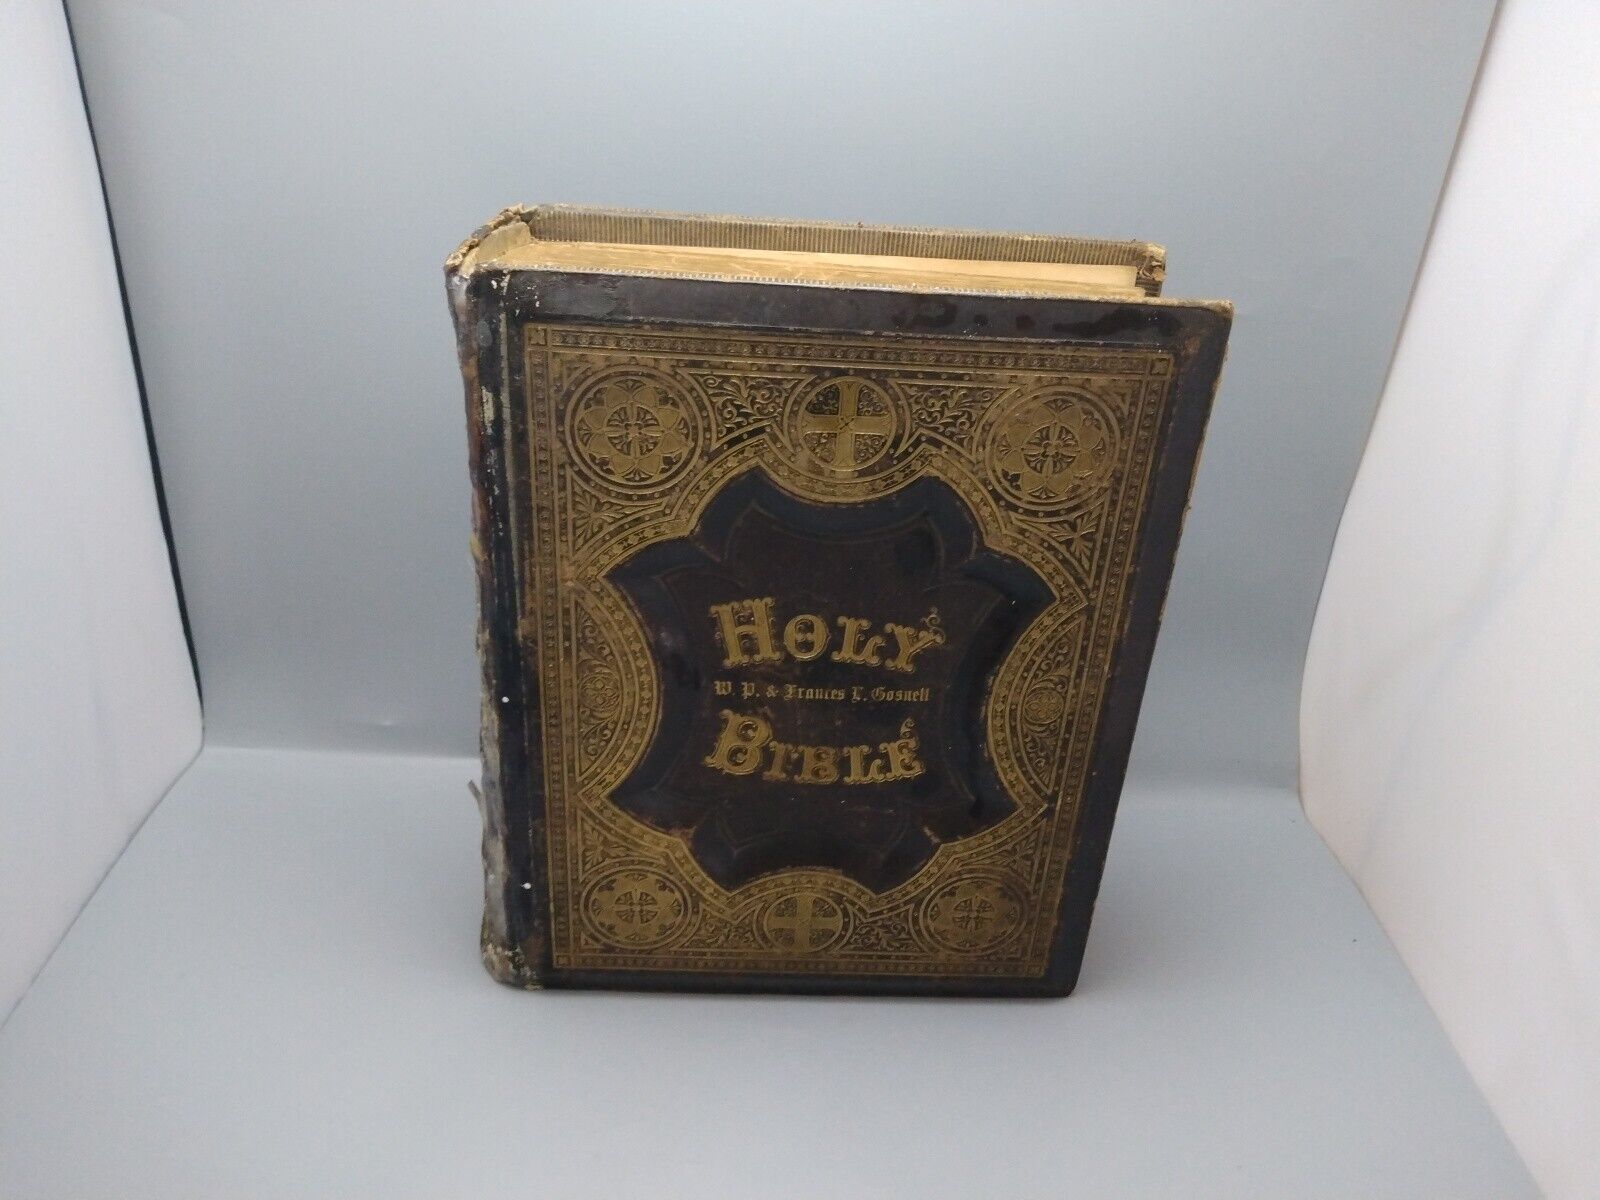  HOLY BIBLE 1872 / 151 Year Old Condition GOOD Very Large, Antique  READ